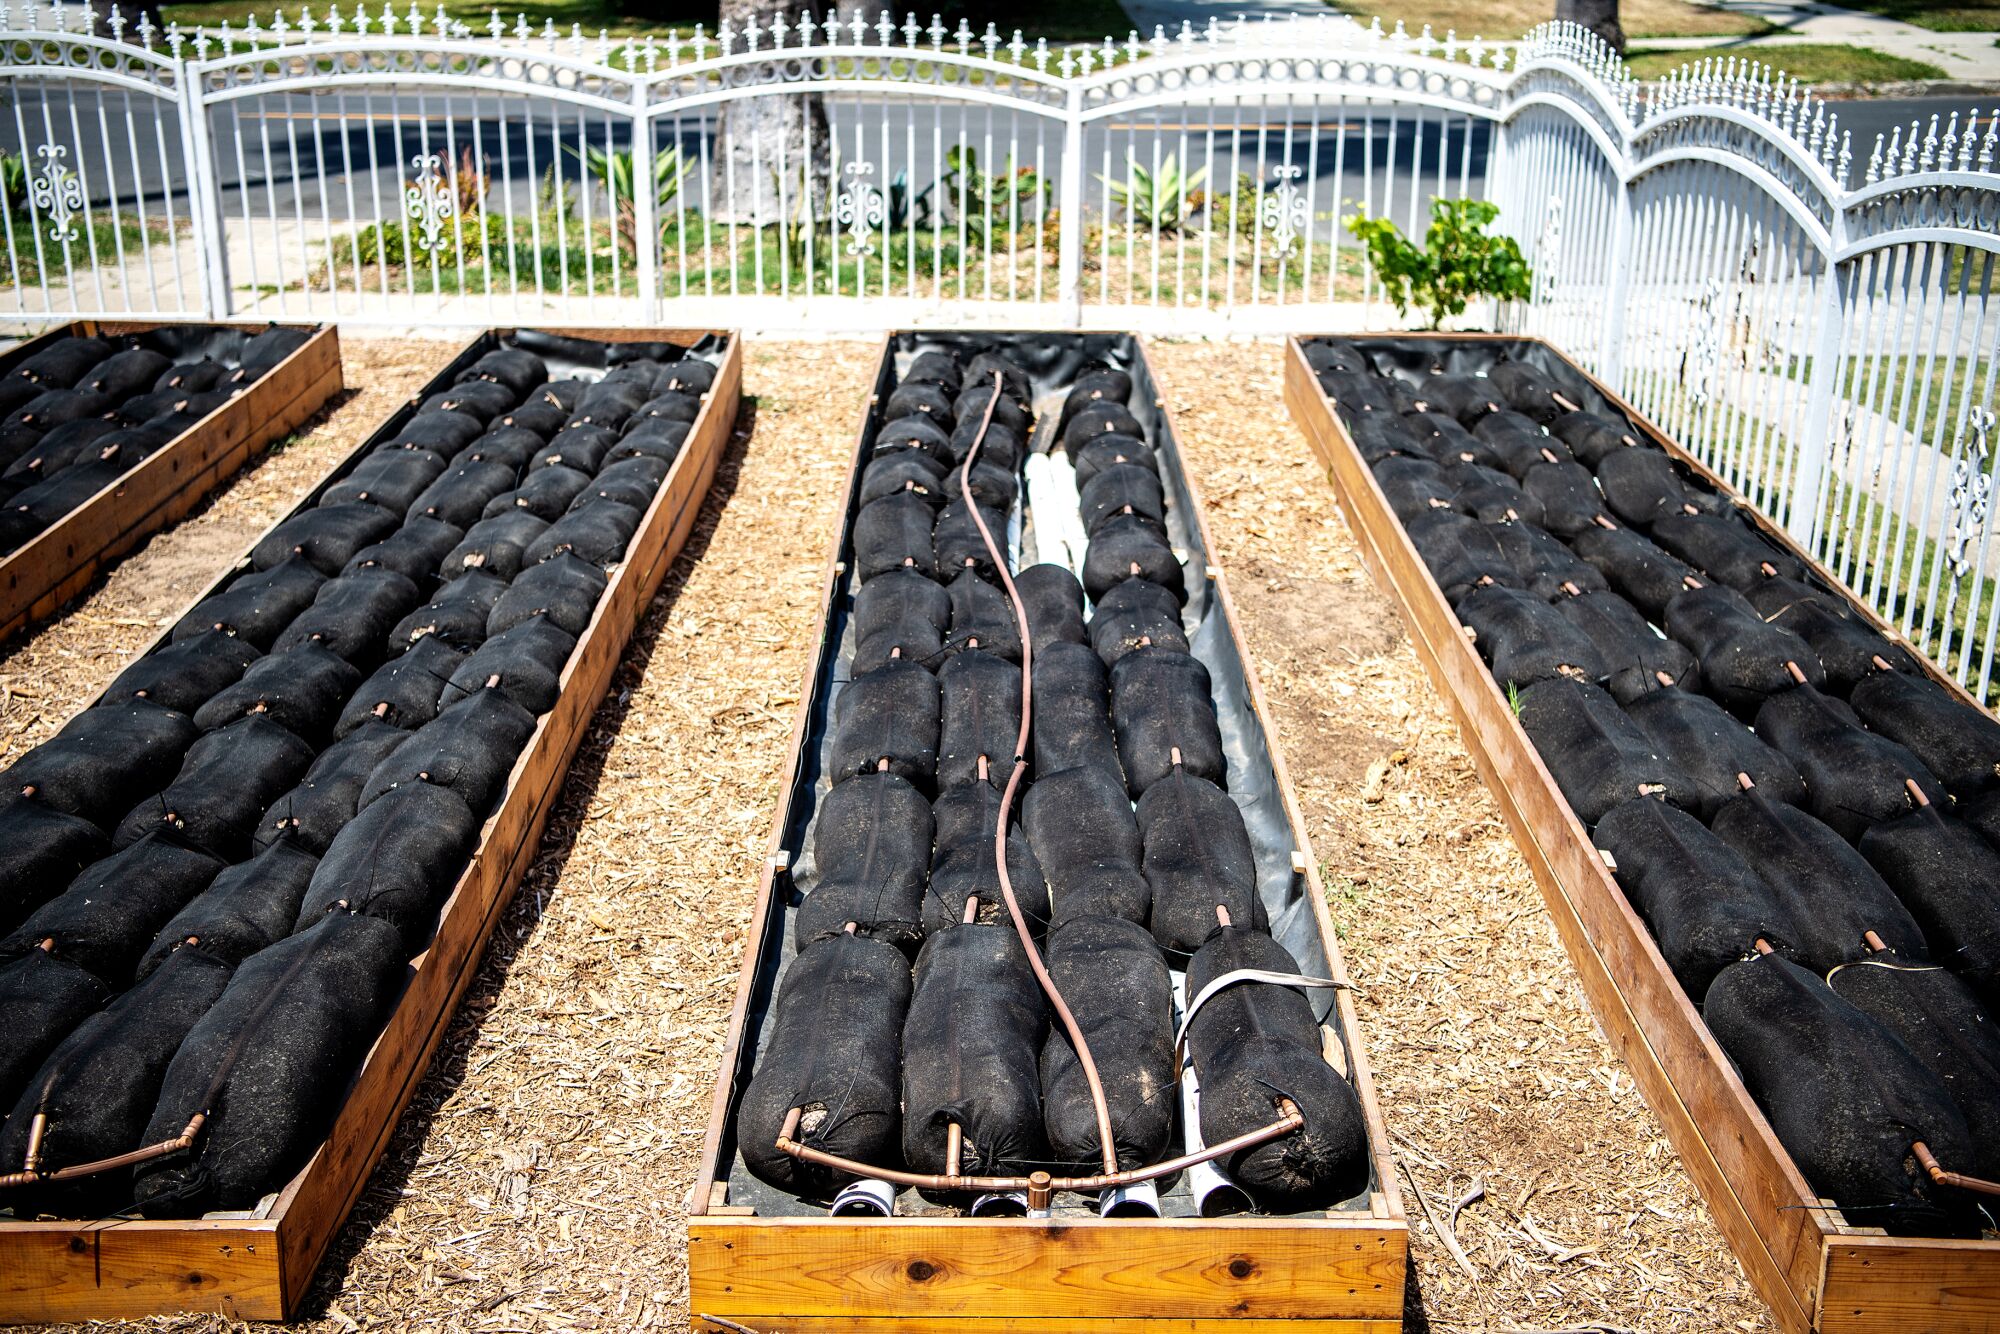 A row of long raised garden beds filled with soil encased in sausage-like bundles waited to be planted.